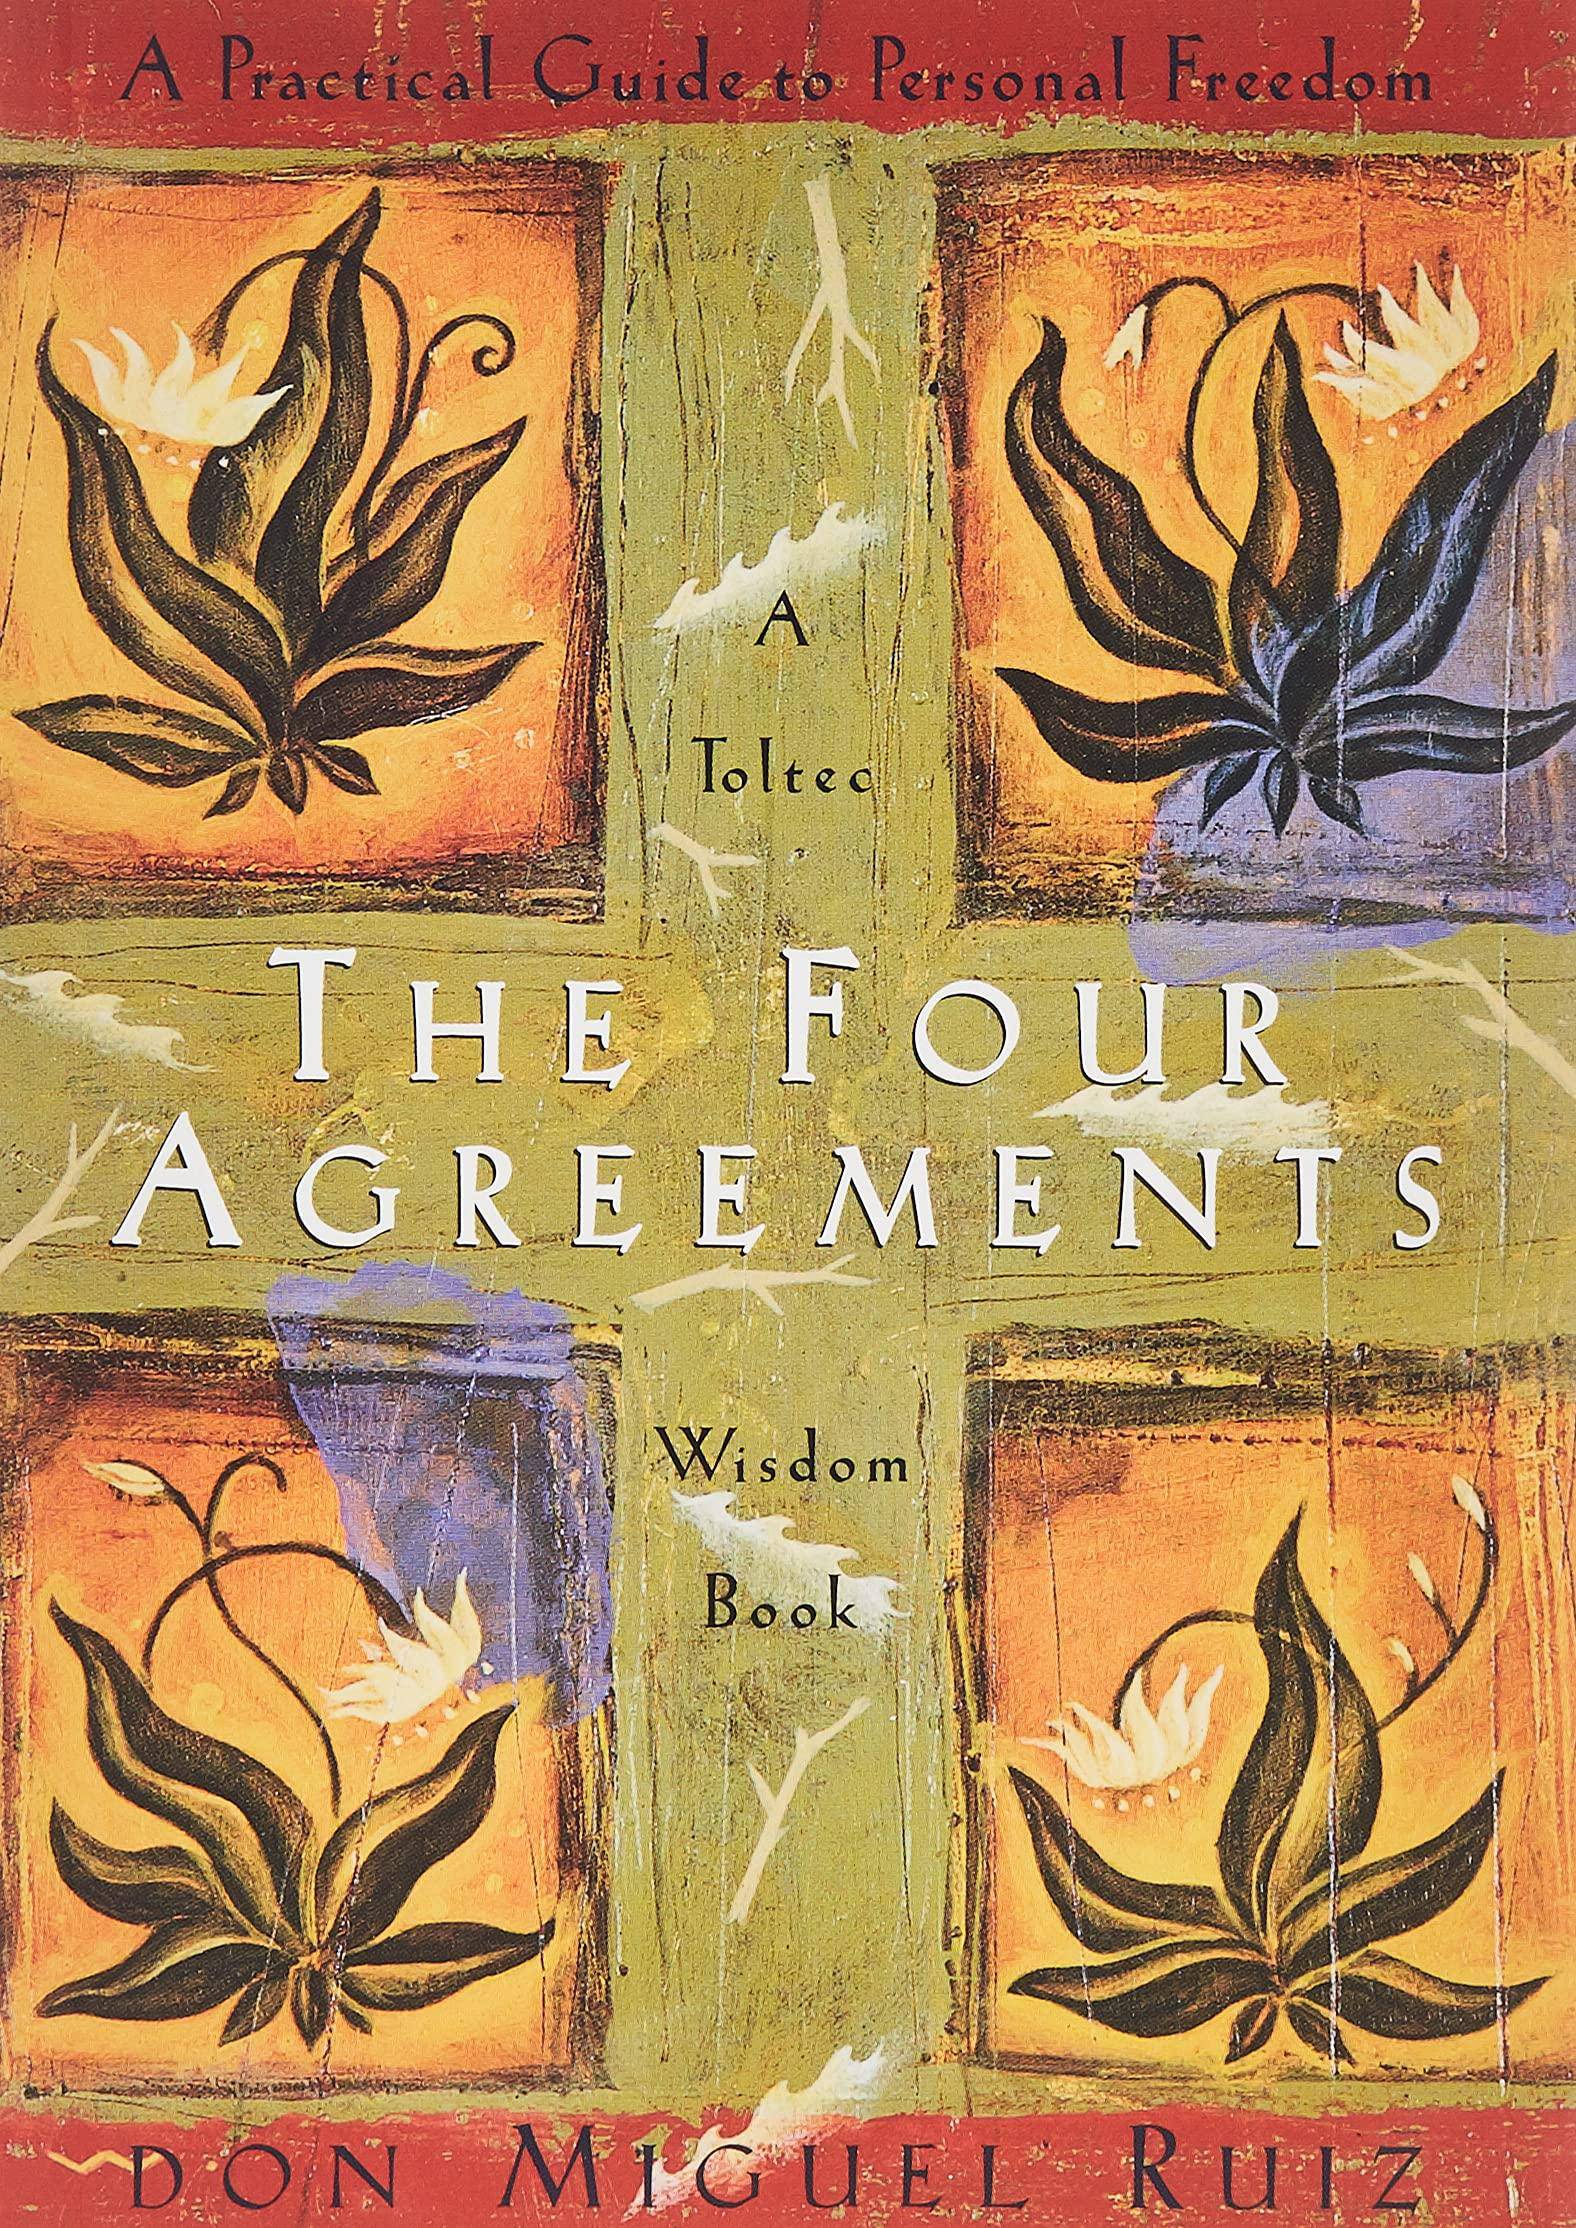 Four Agreements: A Practical Guide to Personal Freedom - SureShot Books Publishing LLC